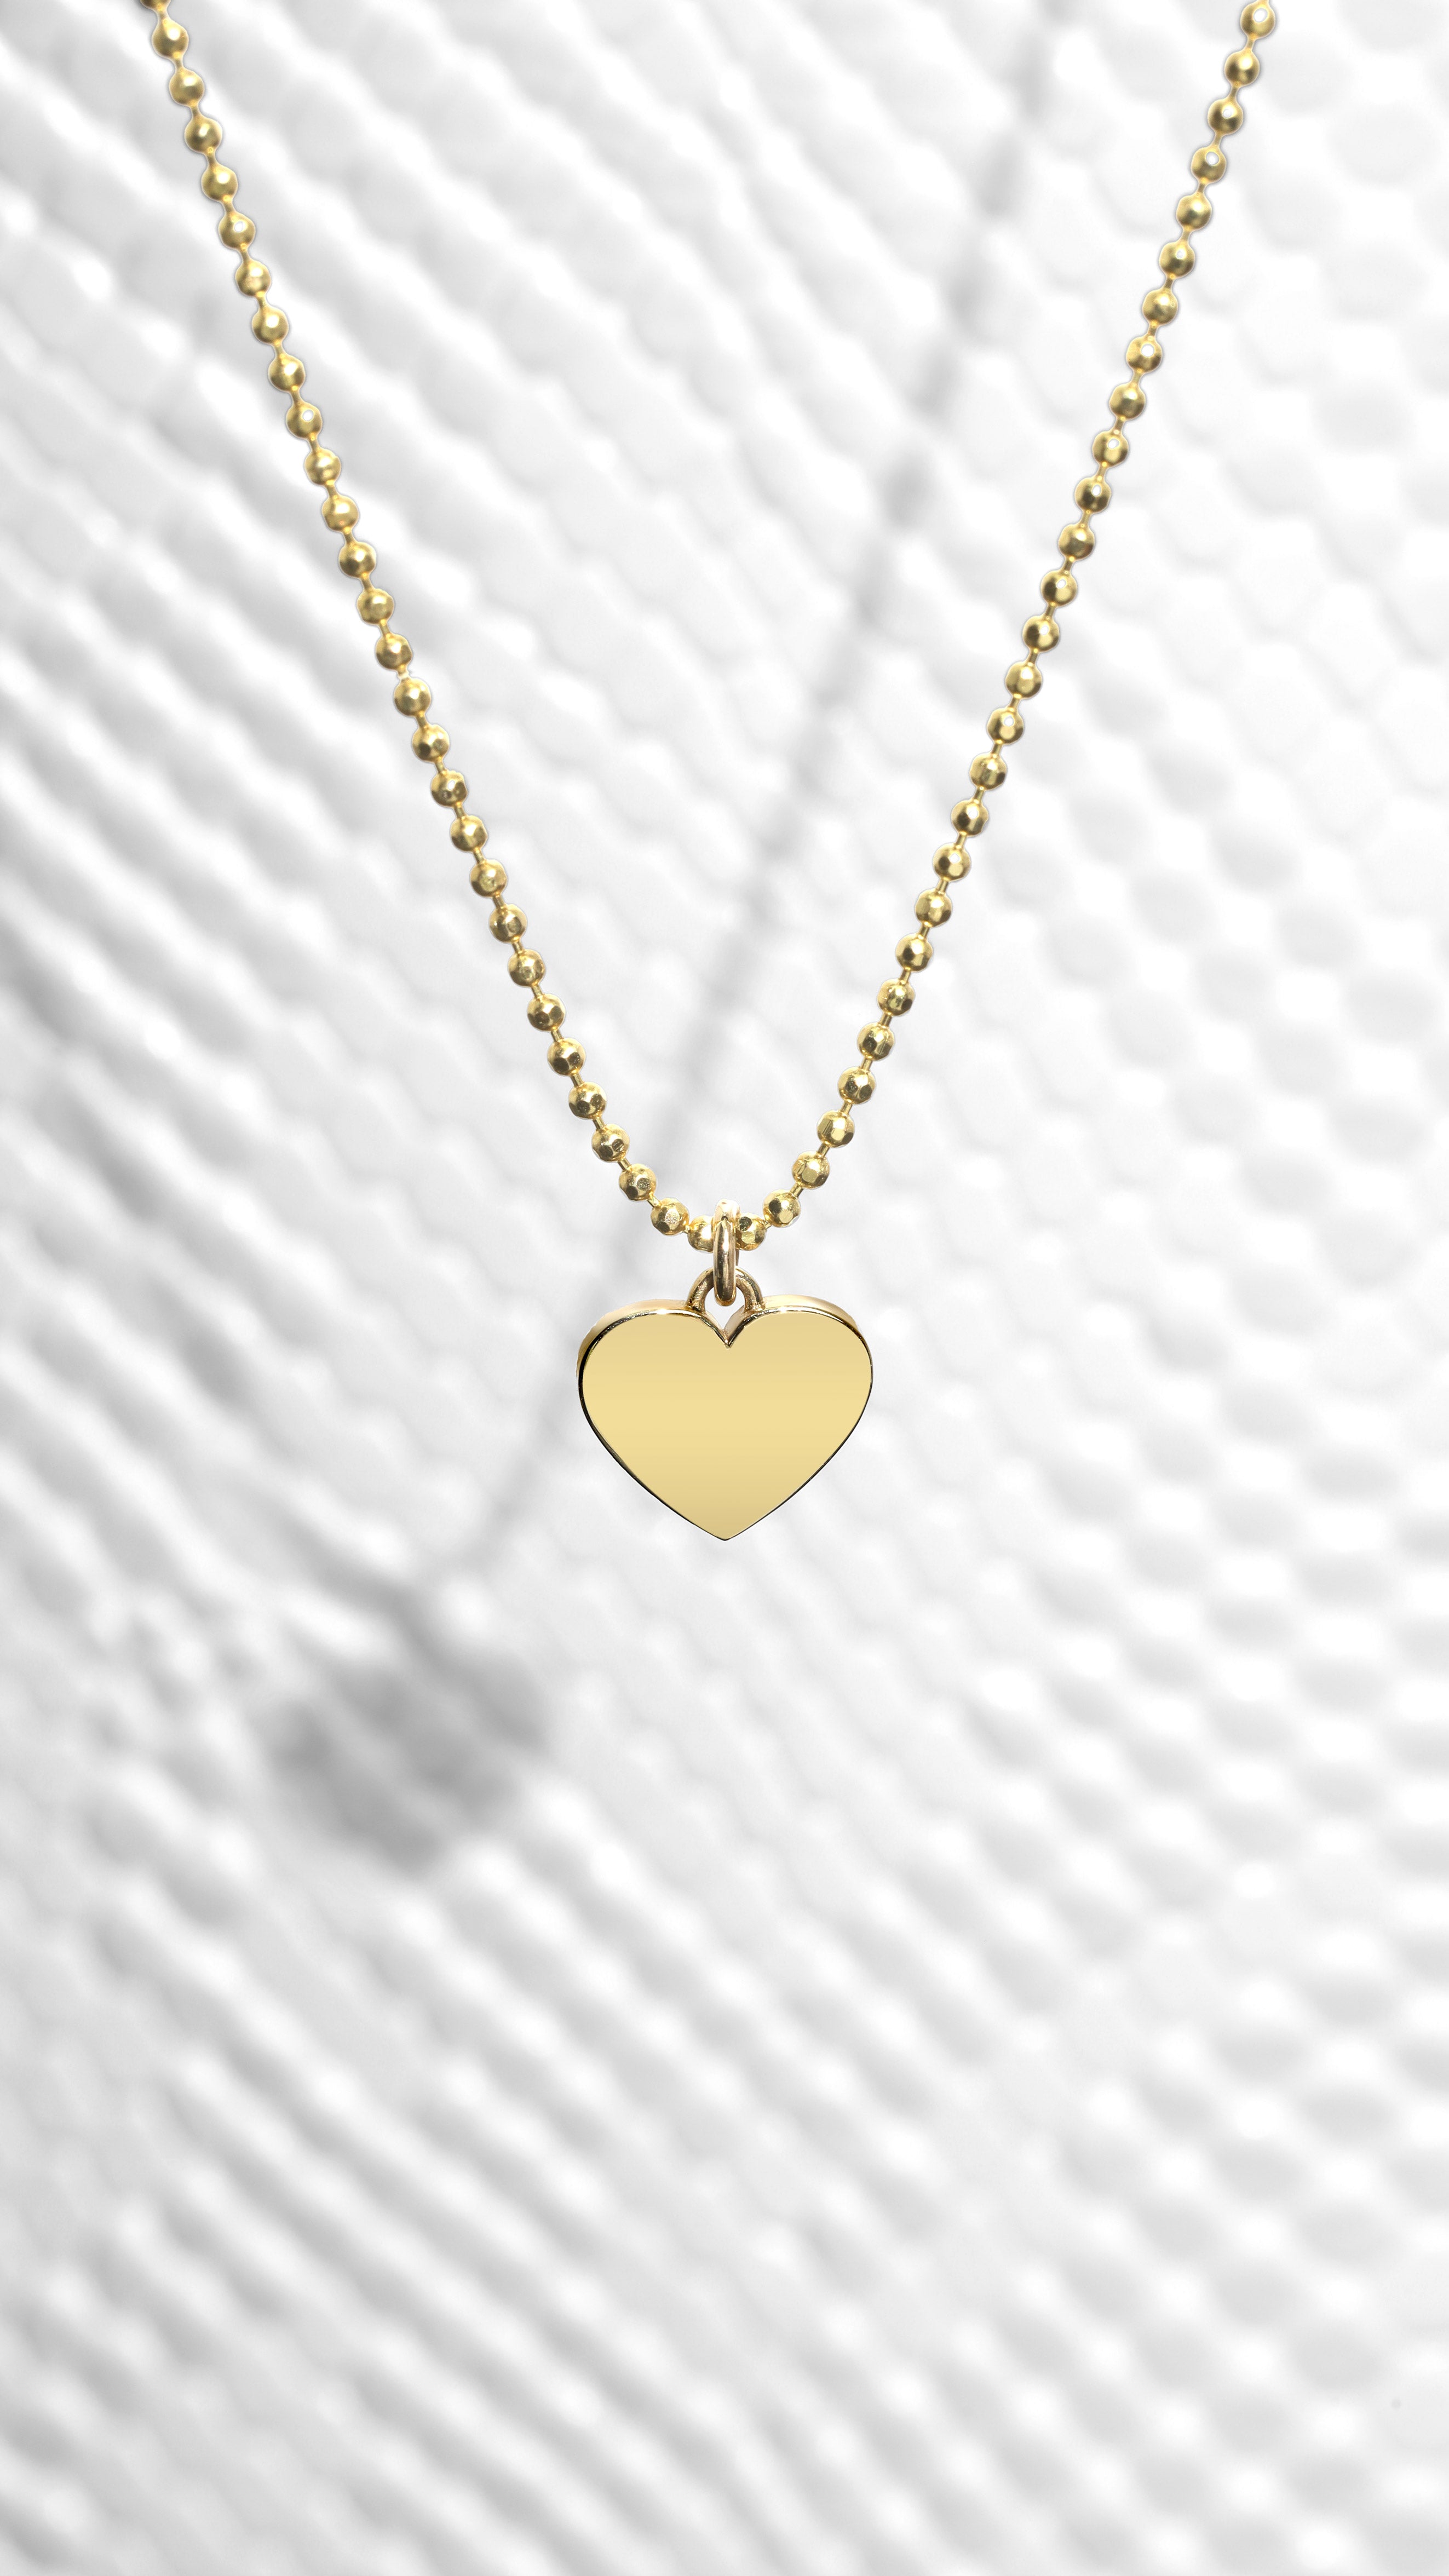 solid gold heart necklace on patterned background